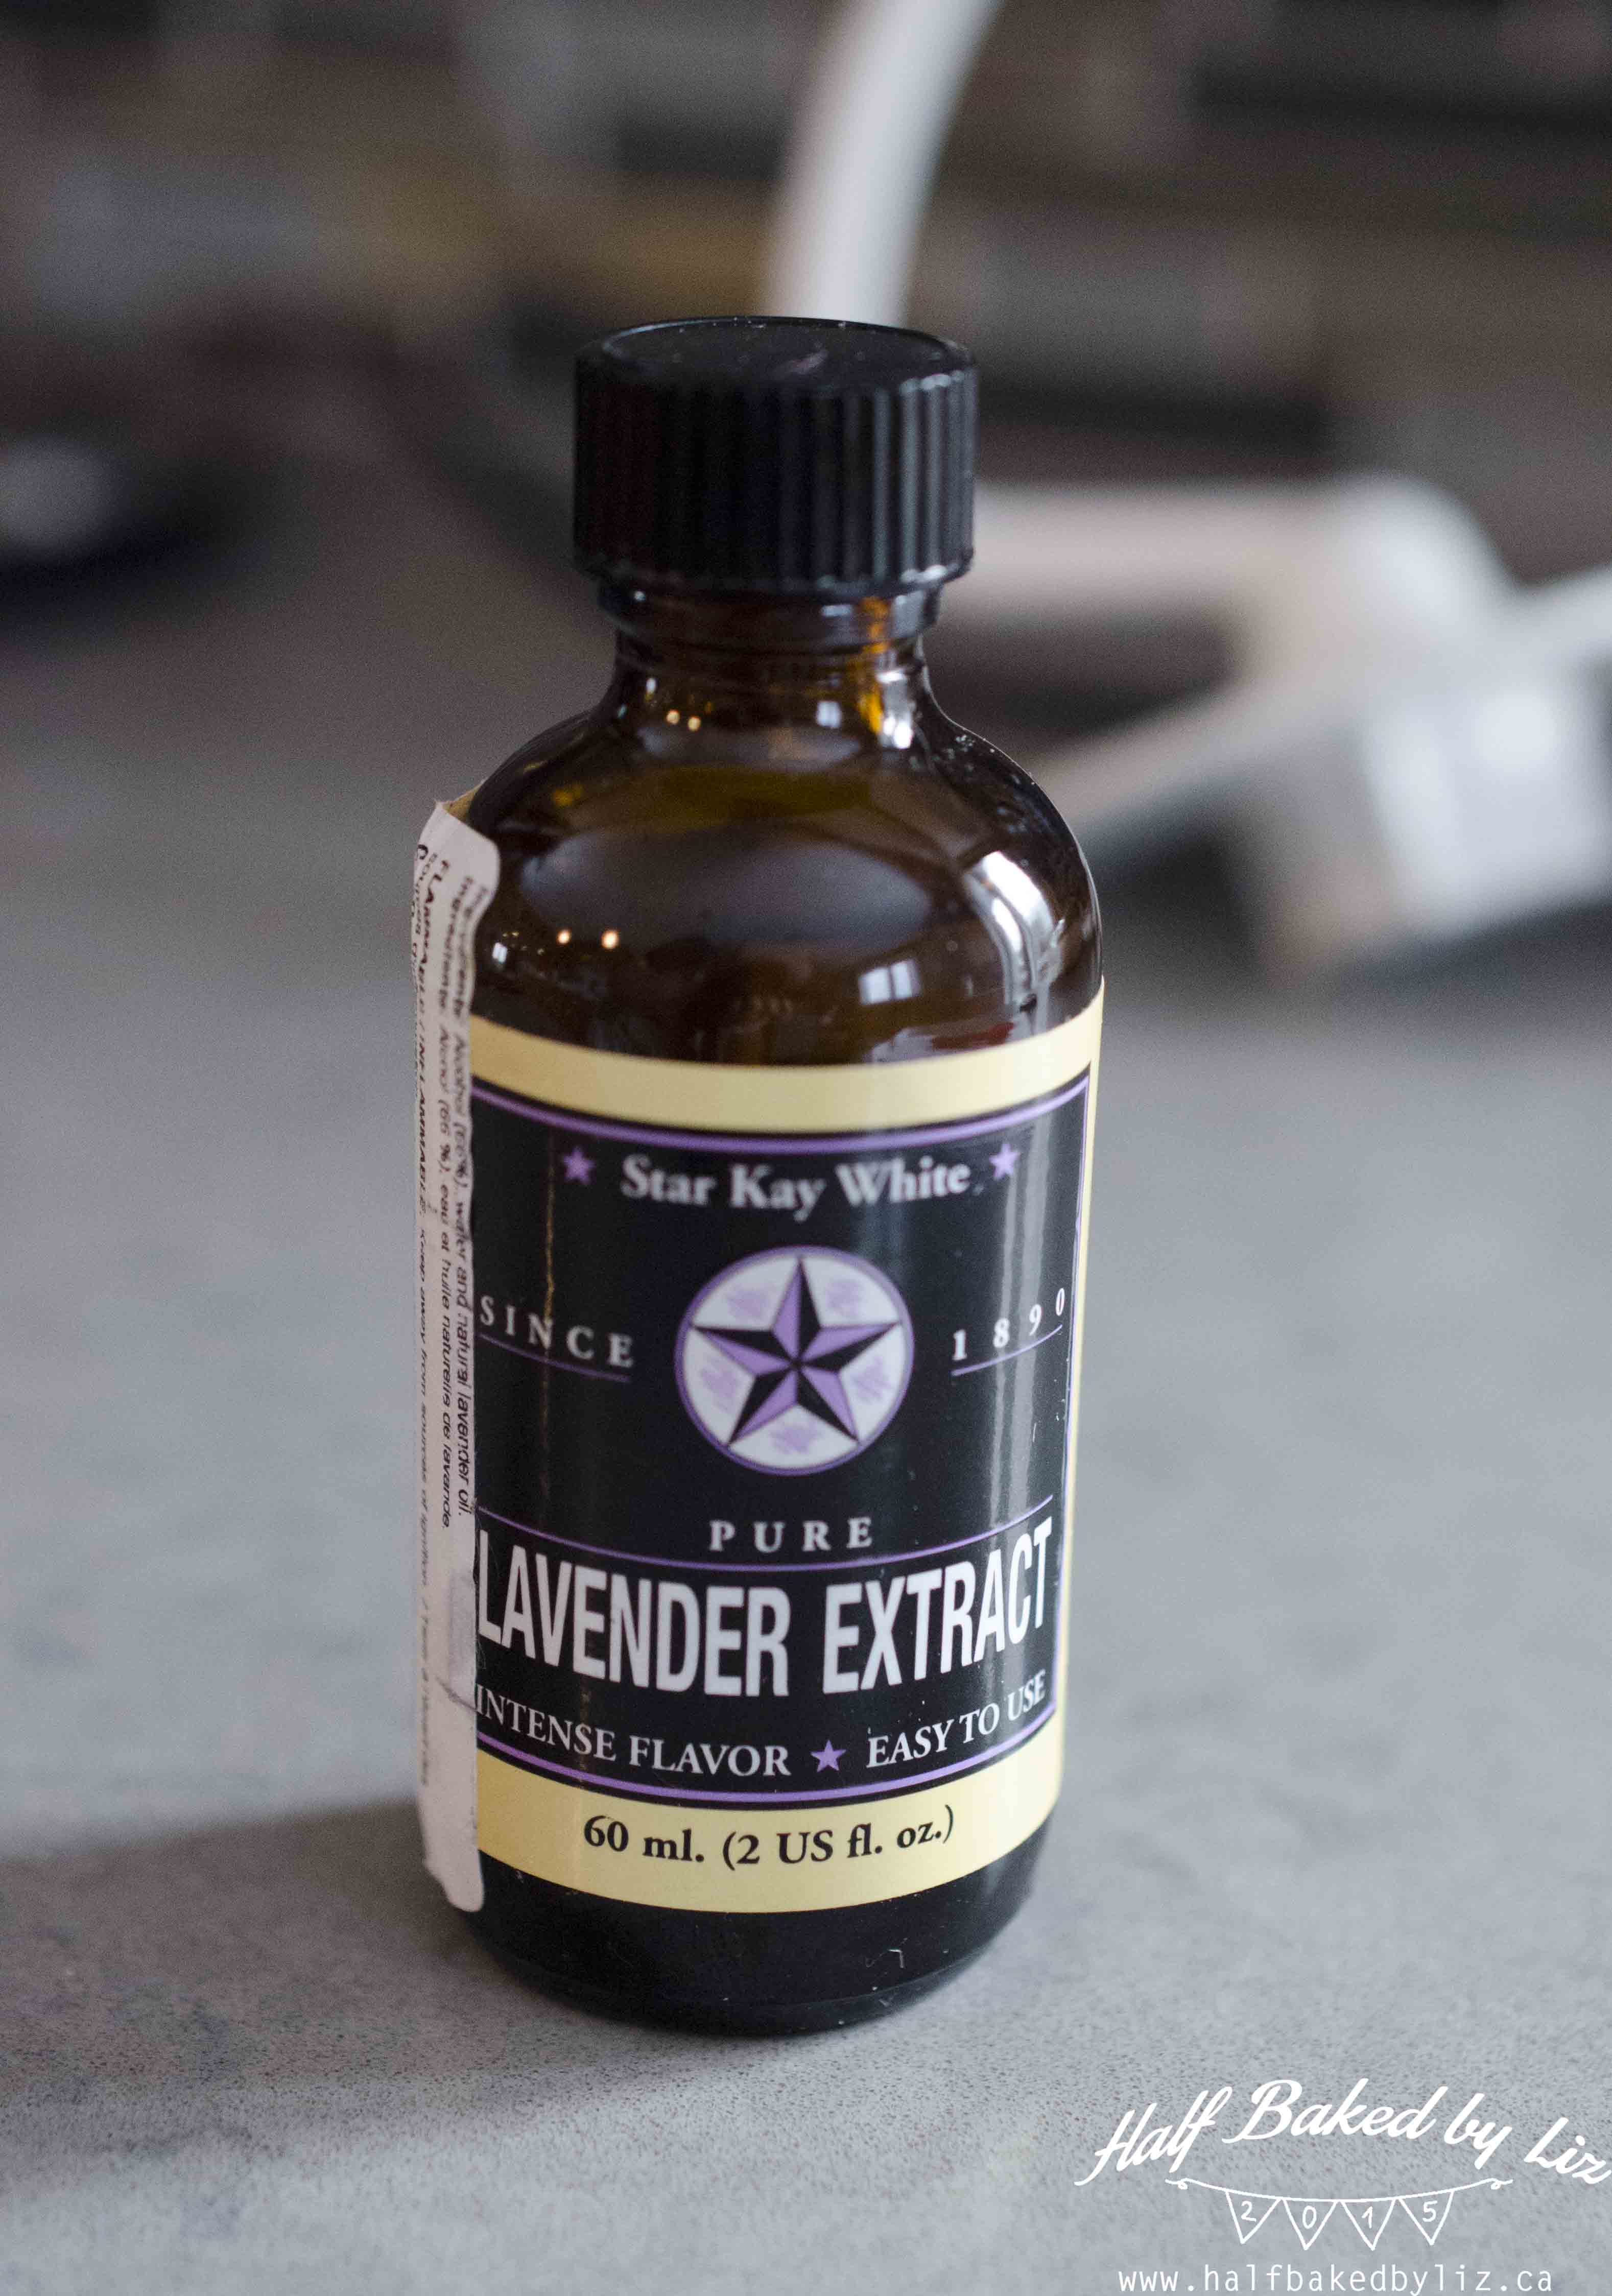 1.5 - Lavender Extract